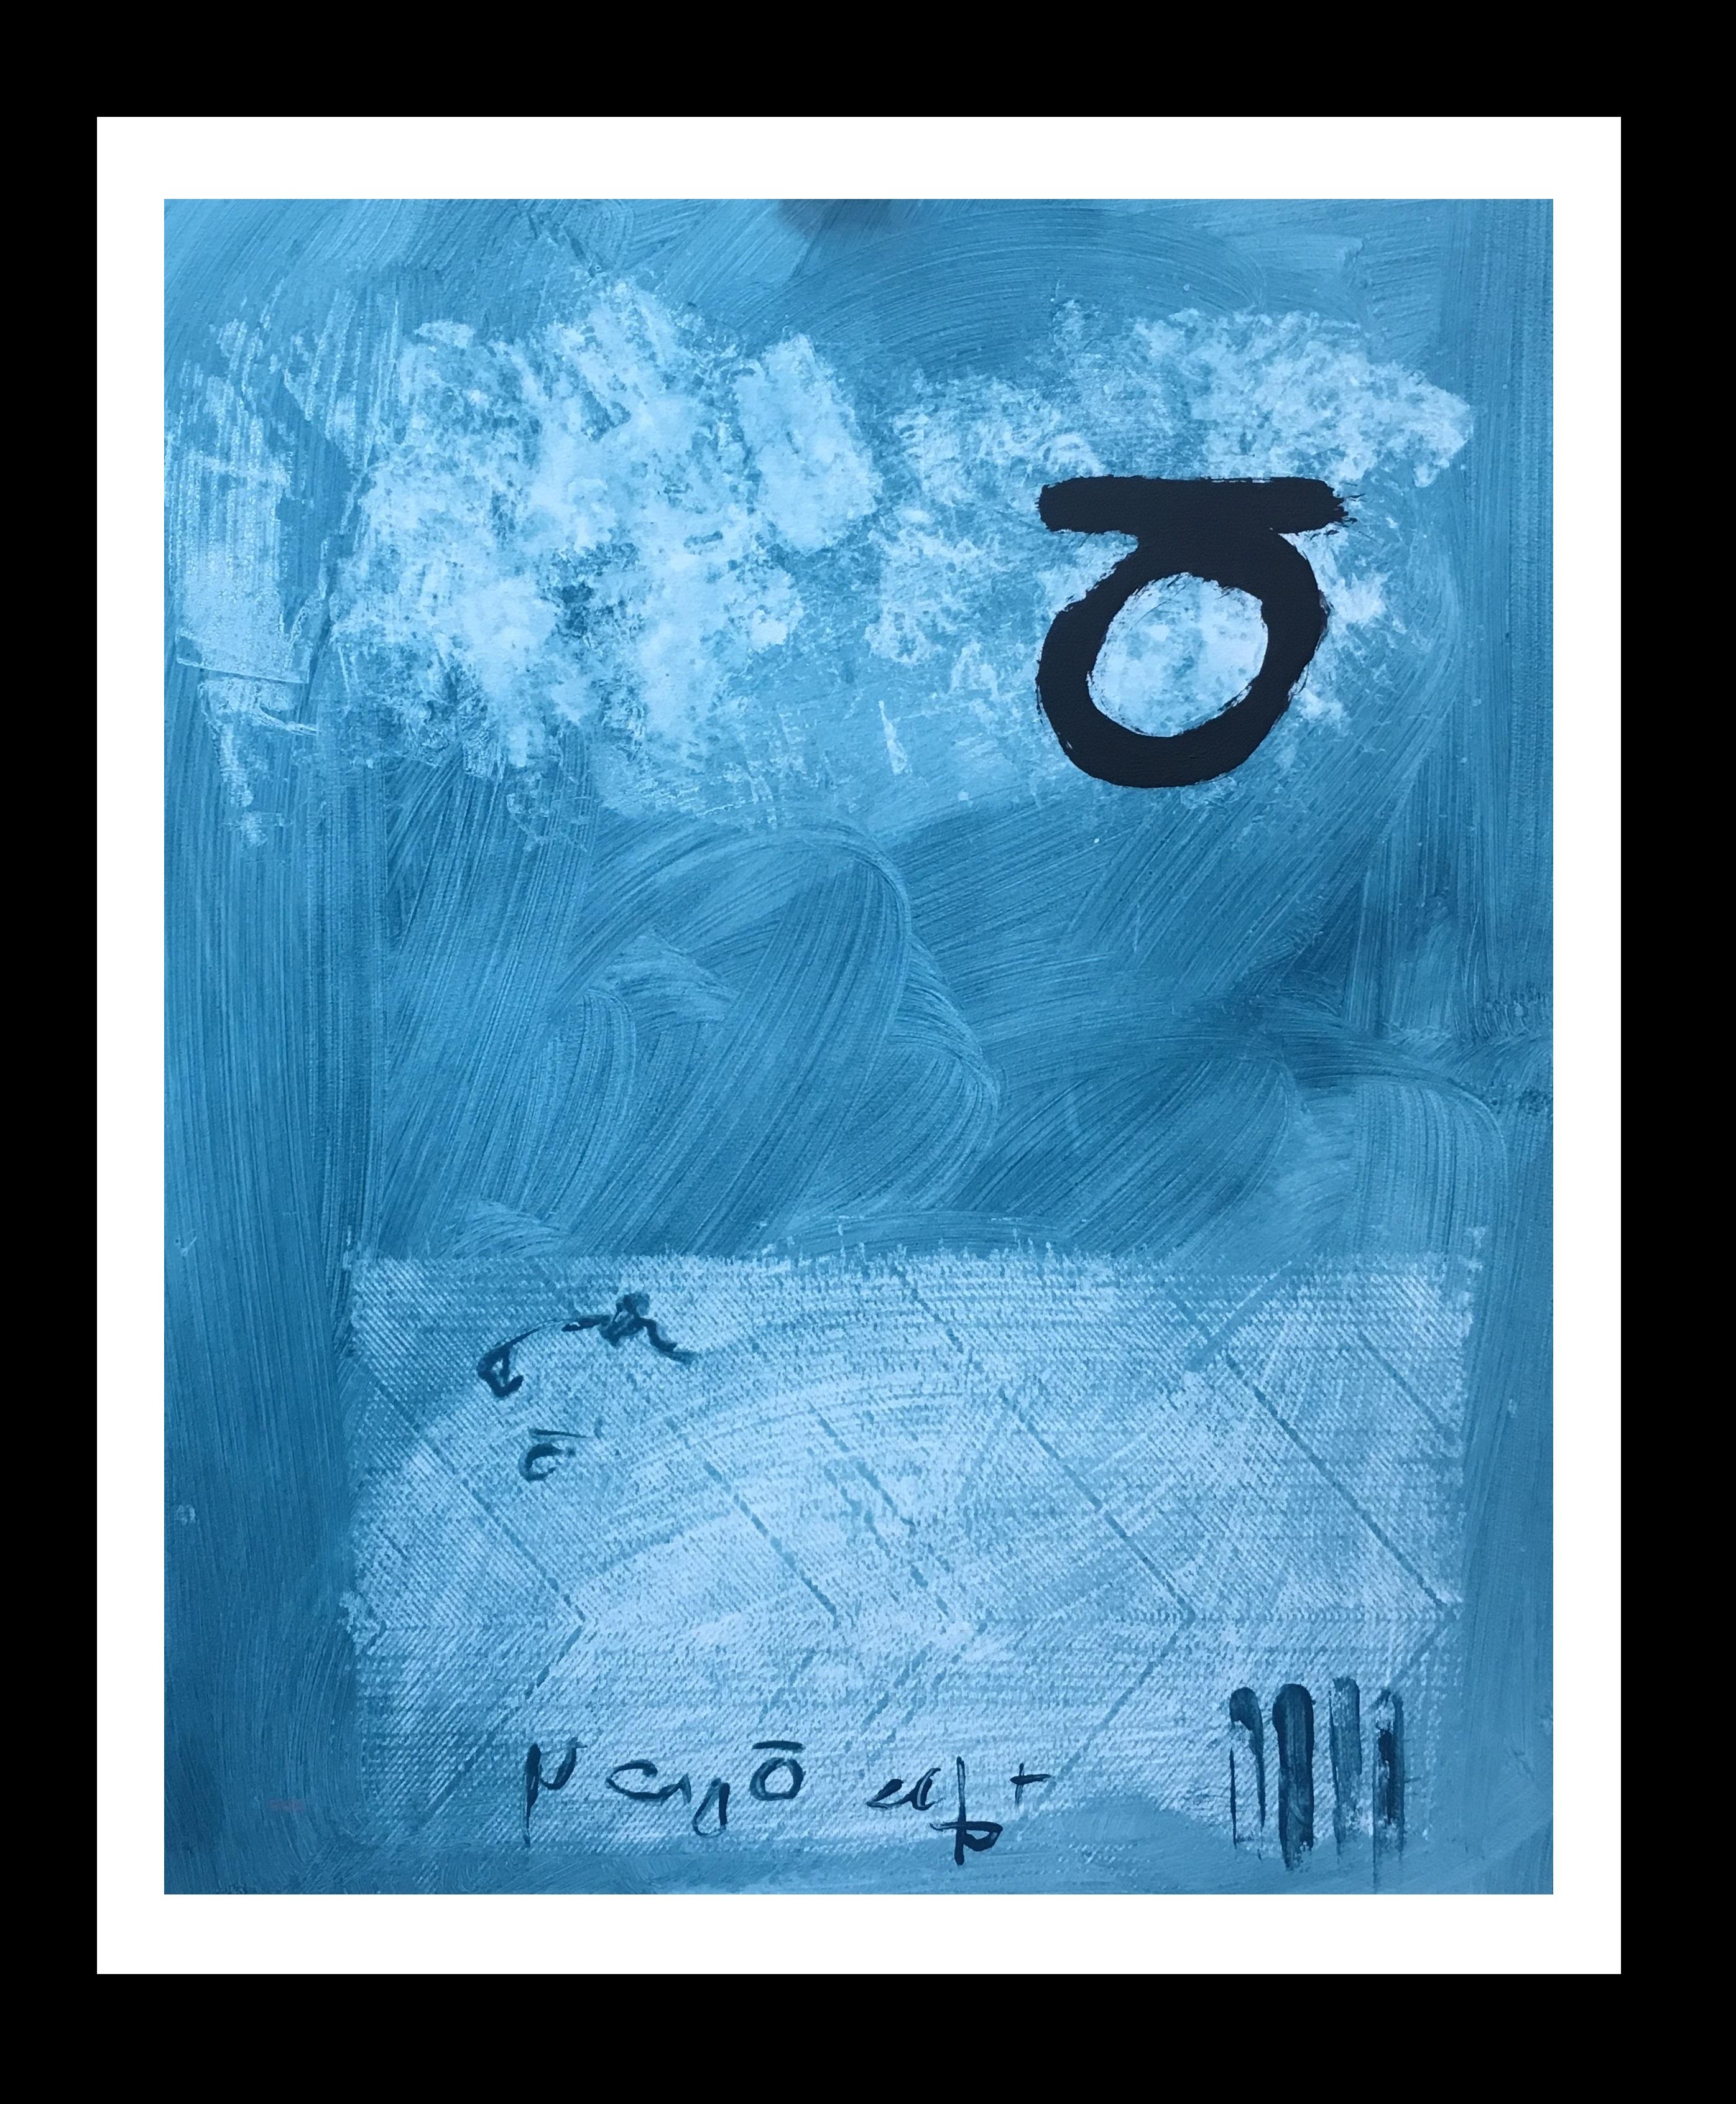 Original work of the artist RUZ
Ruz. astract. Vertical. blue .black - Abstract Acrylic on paper Painting
Perfect state

While contemplating the painting of Ruz, we are inclined to talk about real ‘psychodrama’, in the same sense that Julius Bissier